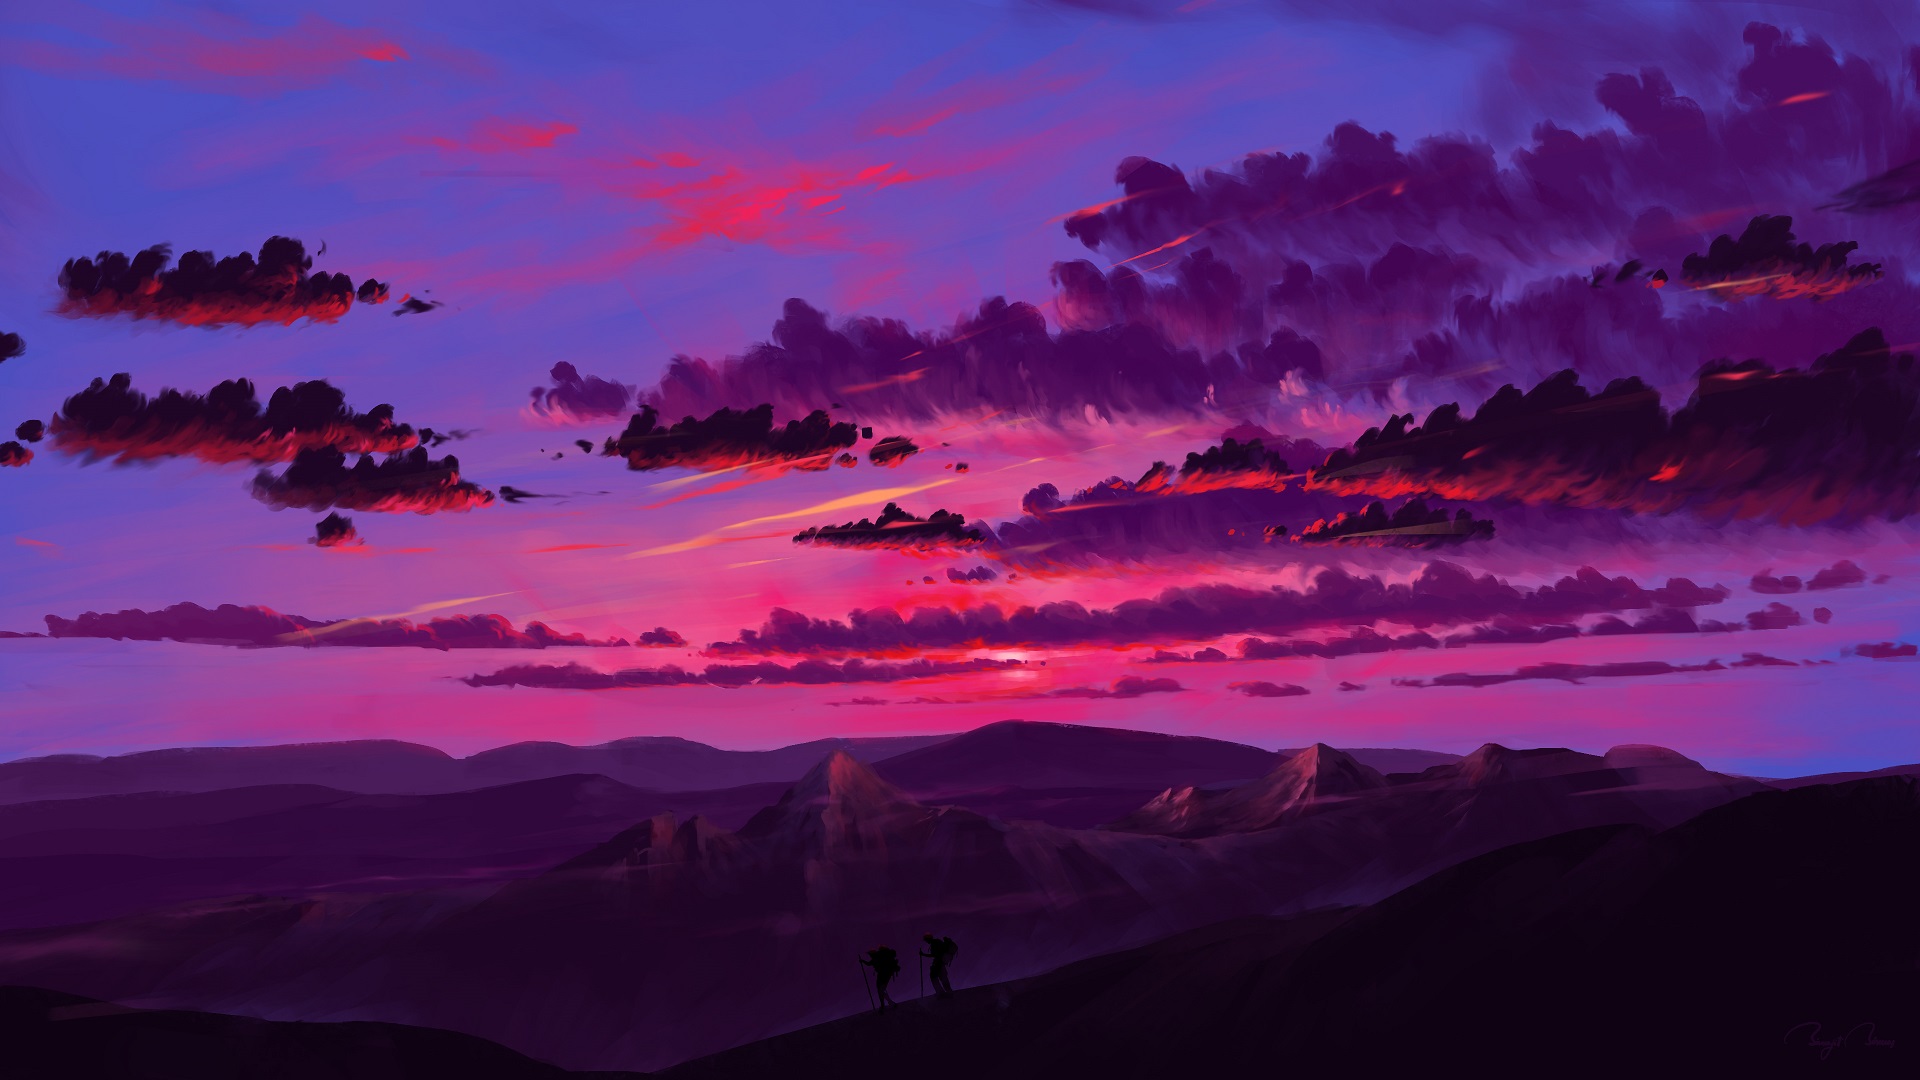 General 1920x1080 digital painting landscape mountains sunset sky clouds BisBiswas